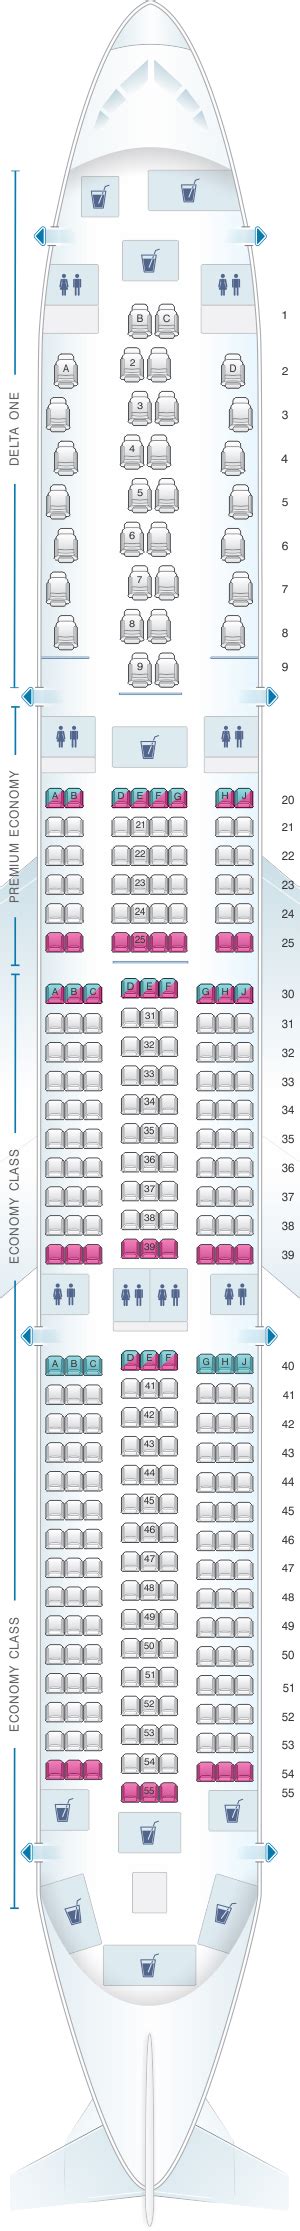 Seat Map And Seating Chart Lufthansa Airbus A350 900 Three Class Layout